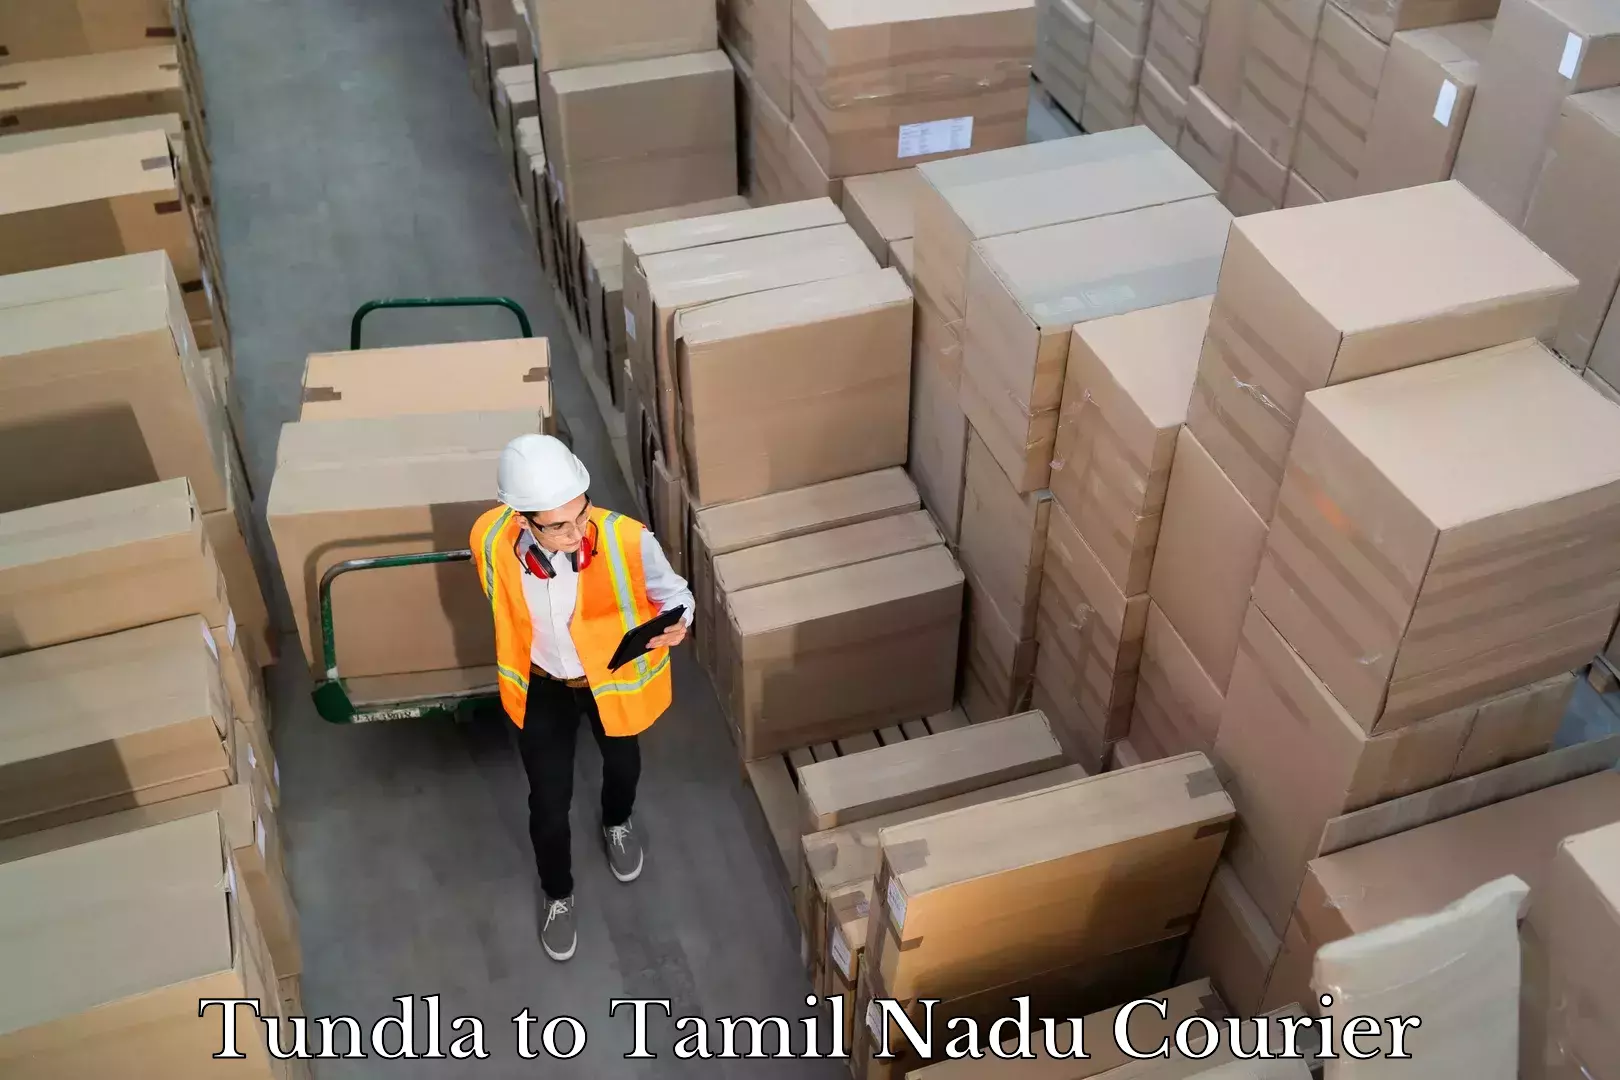 Multi-national courier services Tundla to Tamil Nadu